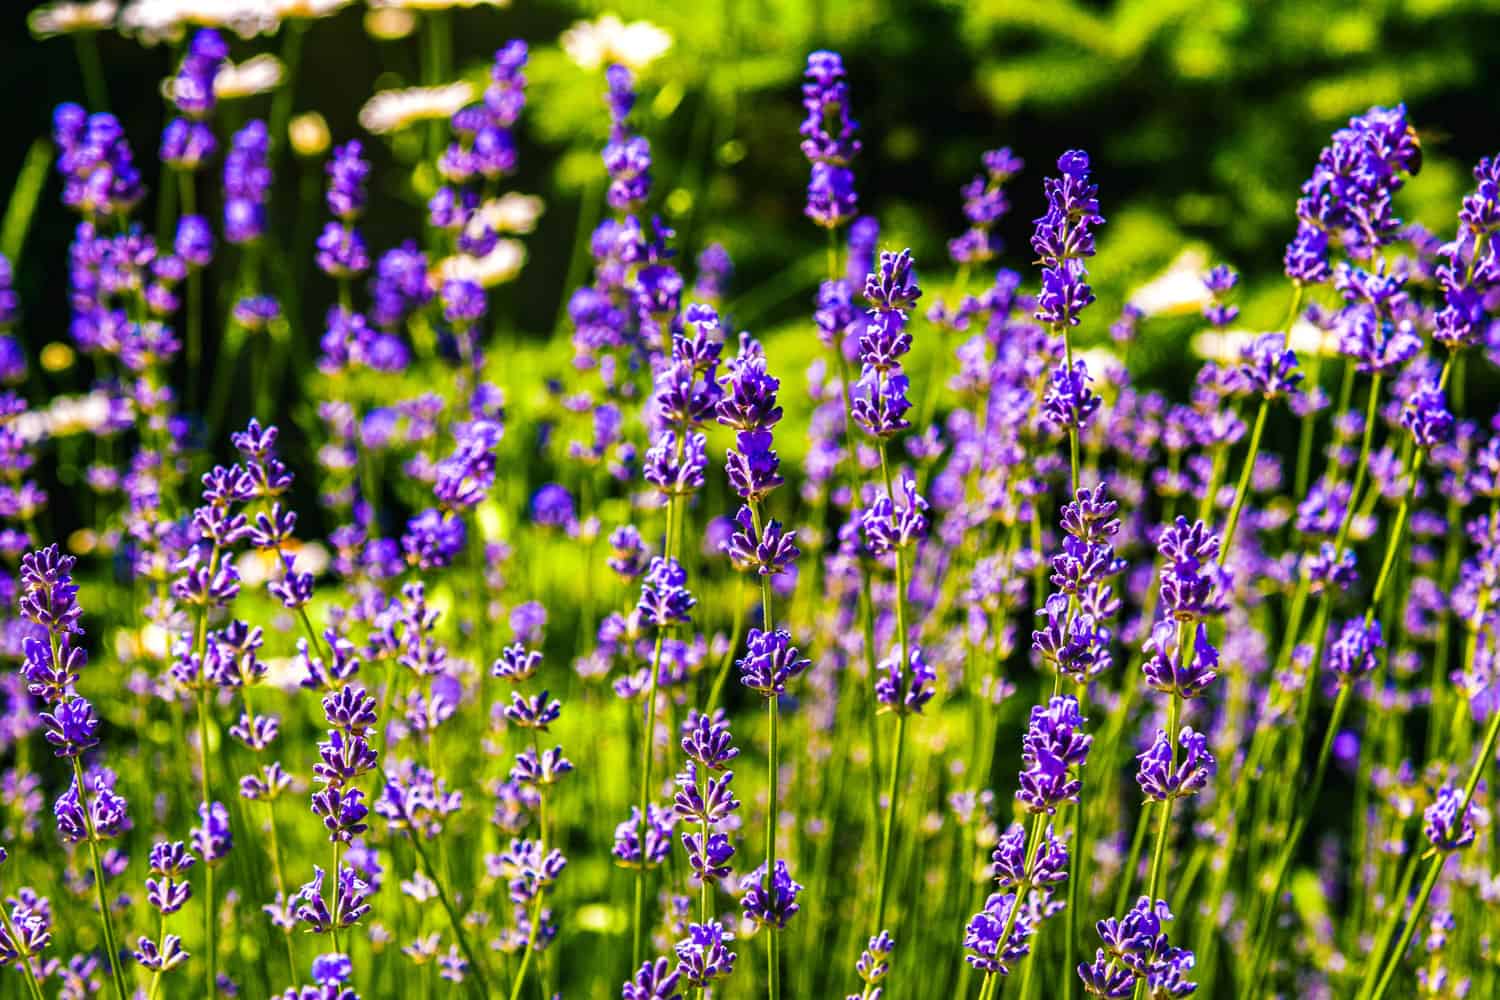 Blooming lavender photographed up close